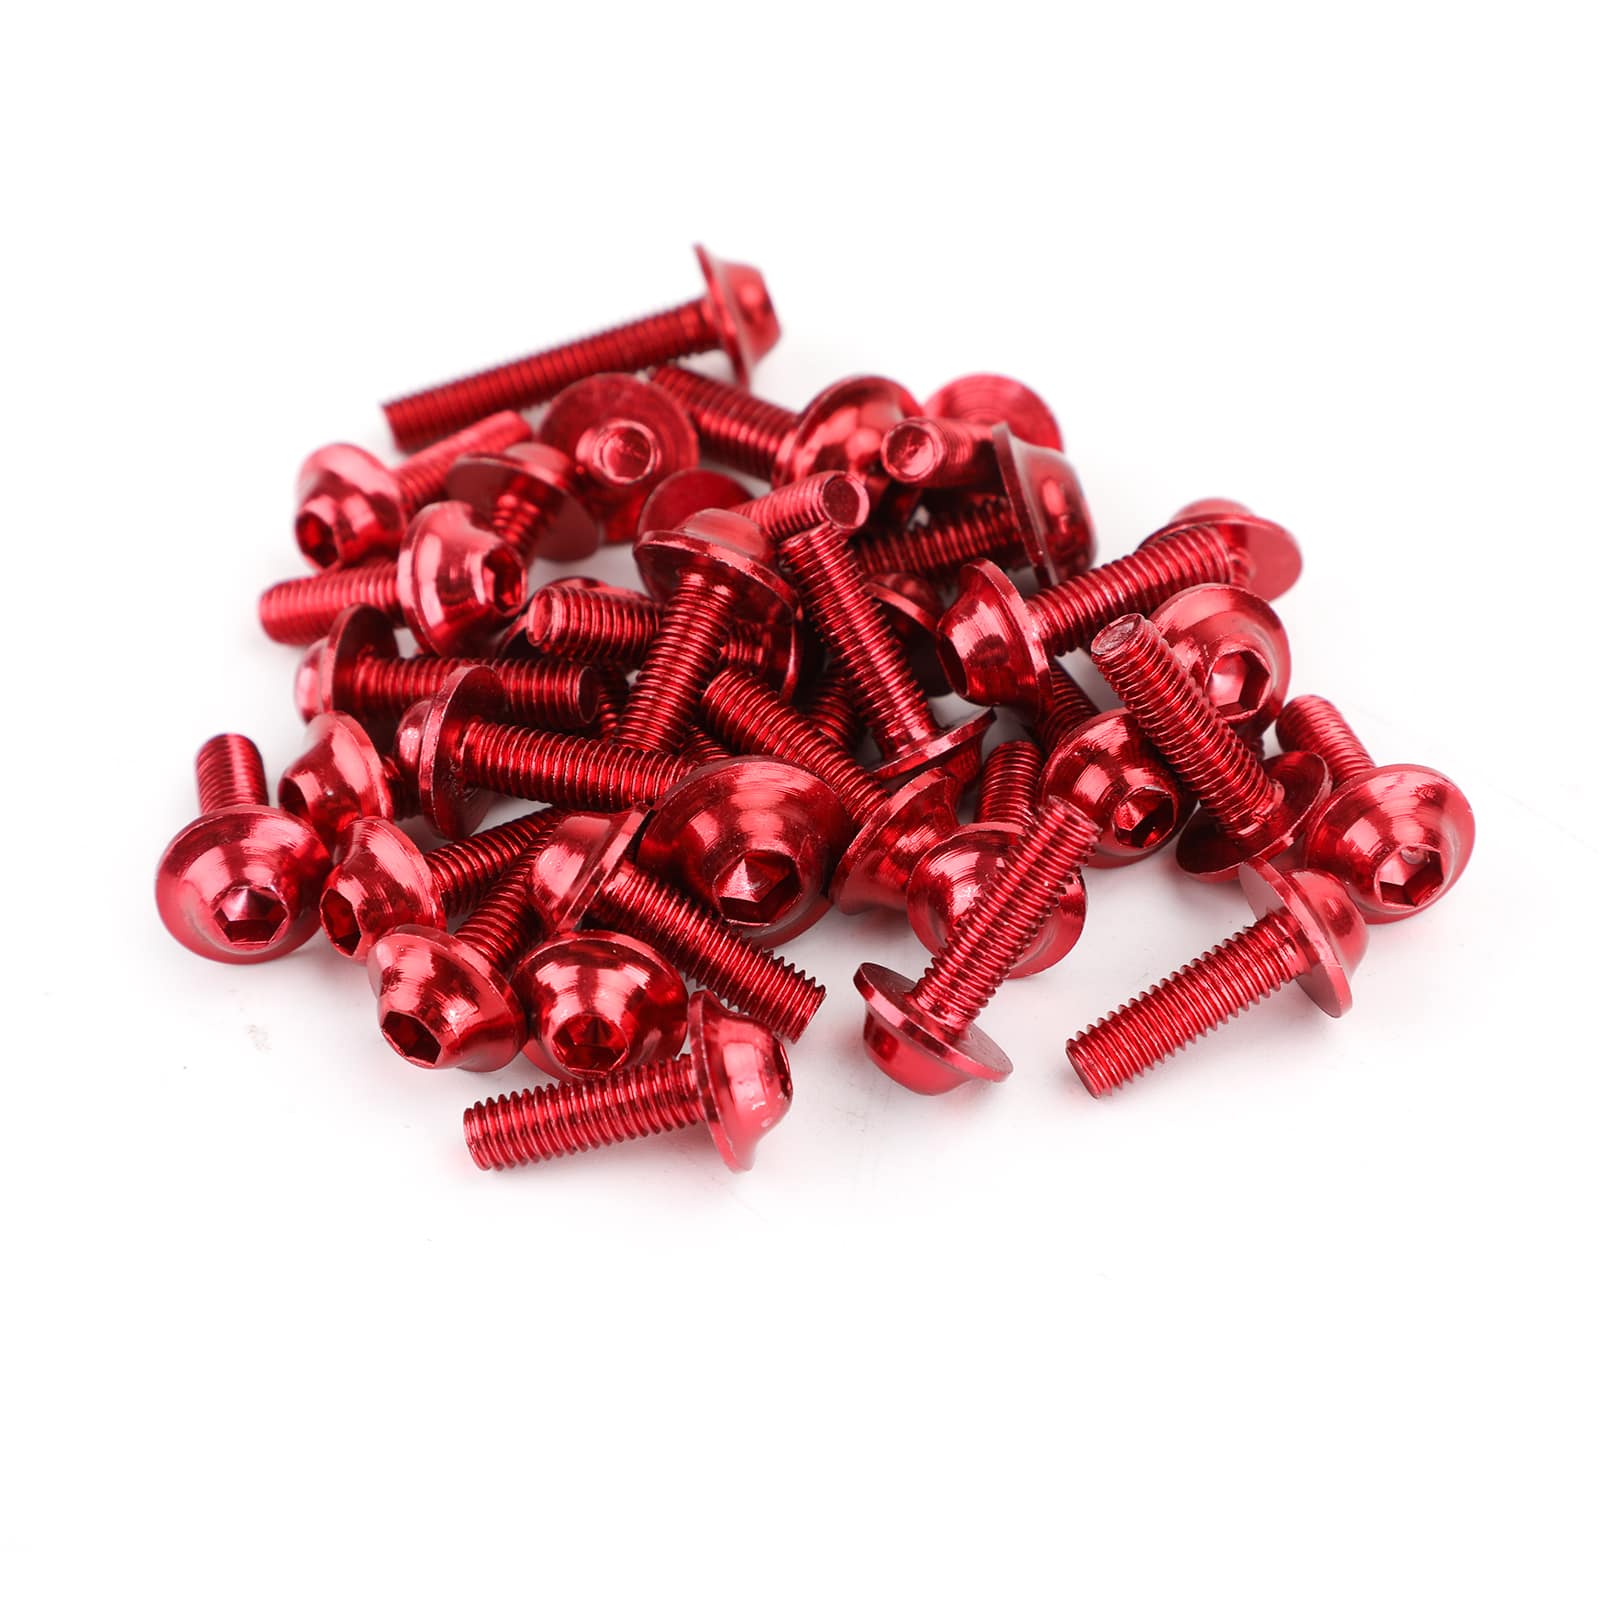 Fastener Clip Screw Kit Windscreen Fairing Bolt Universal 158pcs Fit For Universal Motorcycle Red